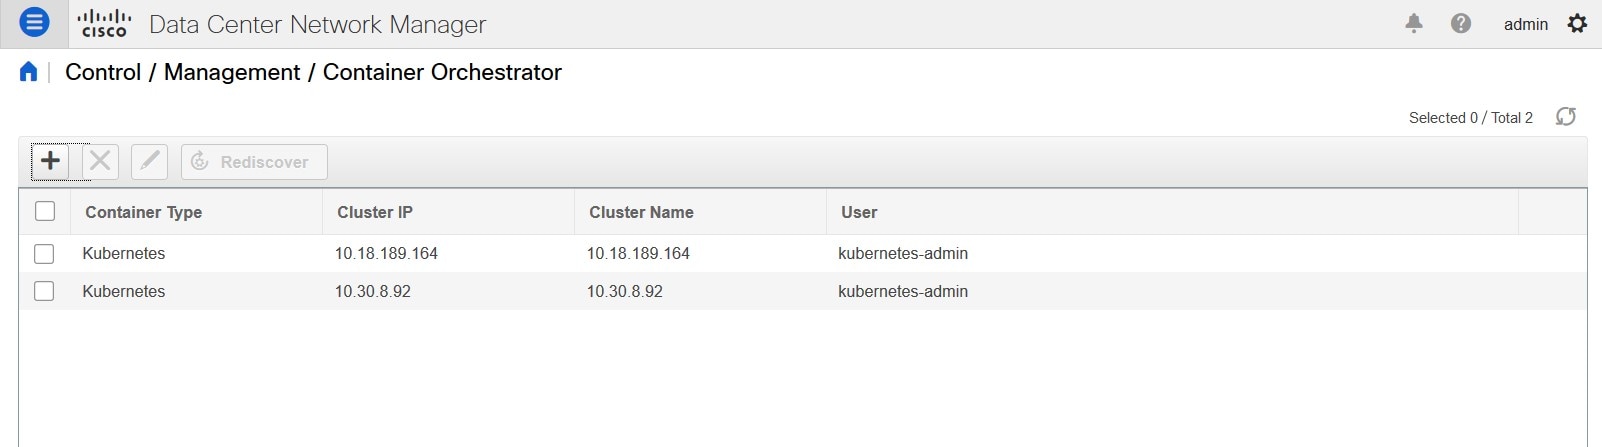 Add container orchestrator